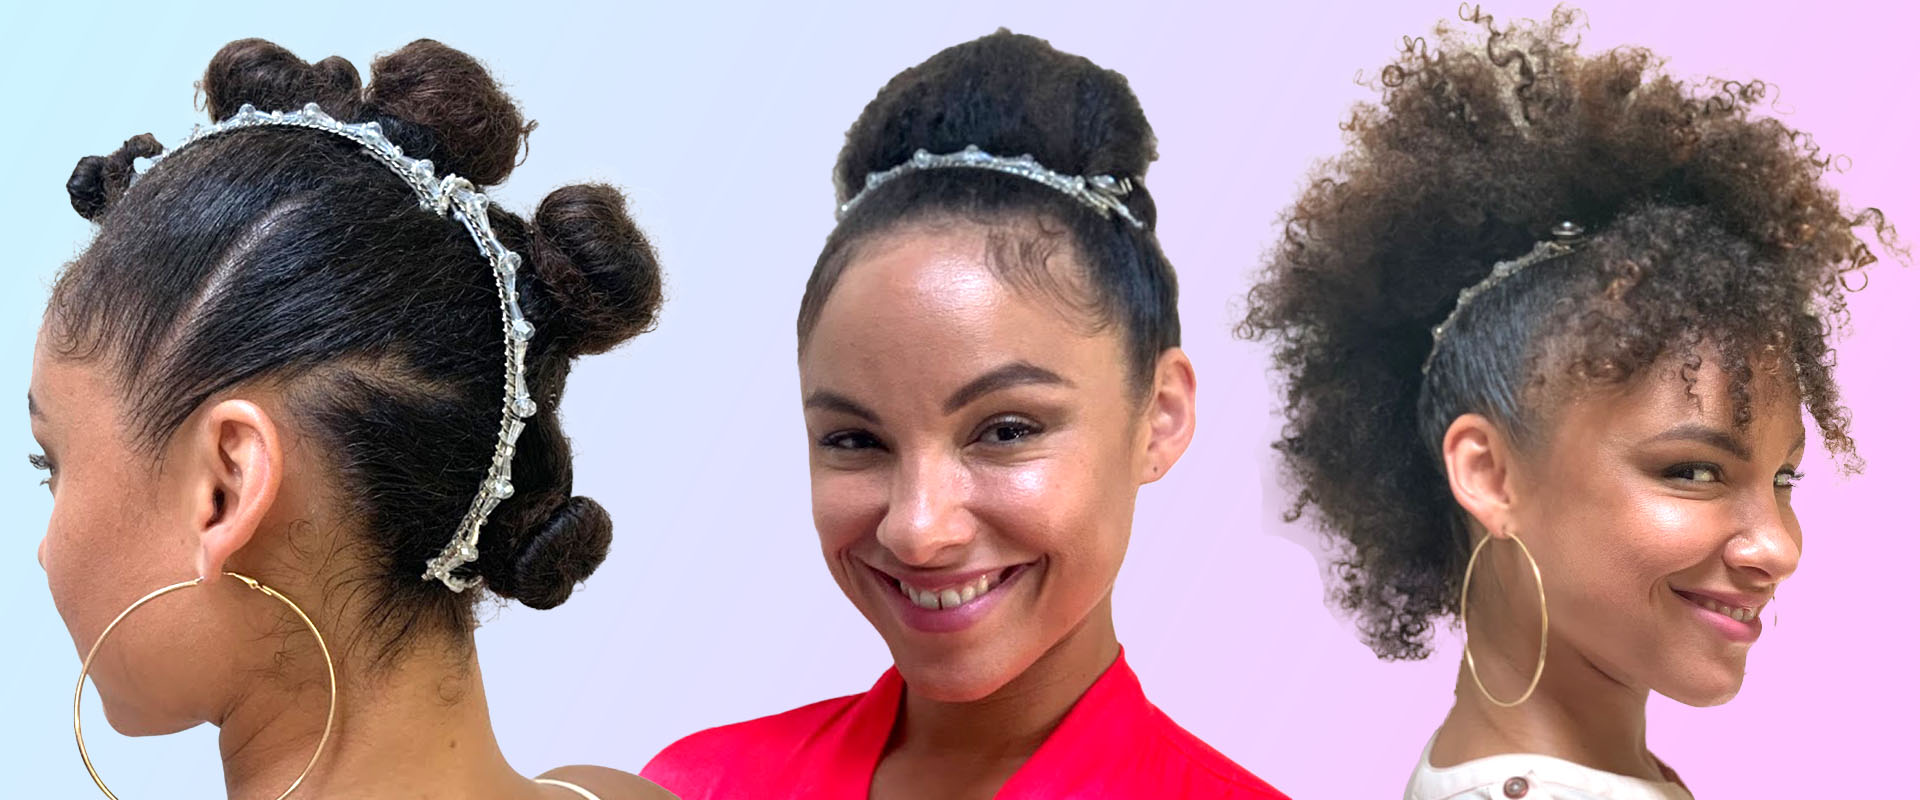 10 Banana Hair Clips You Desperately Need to Try